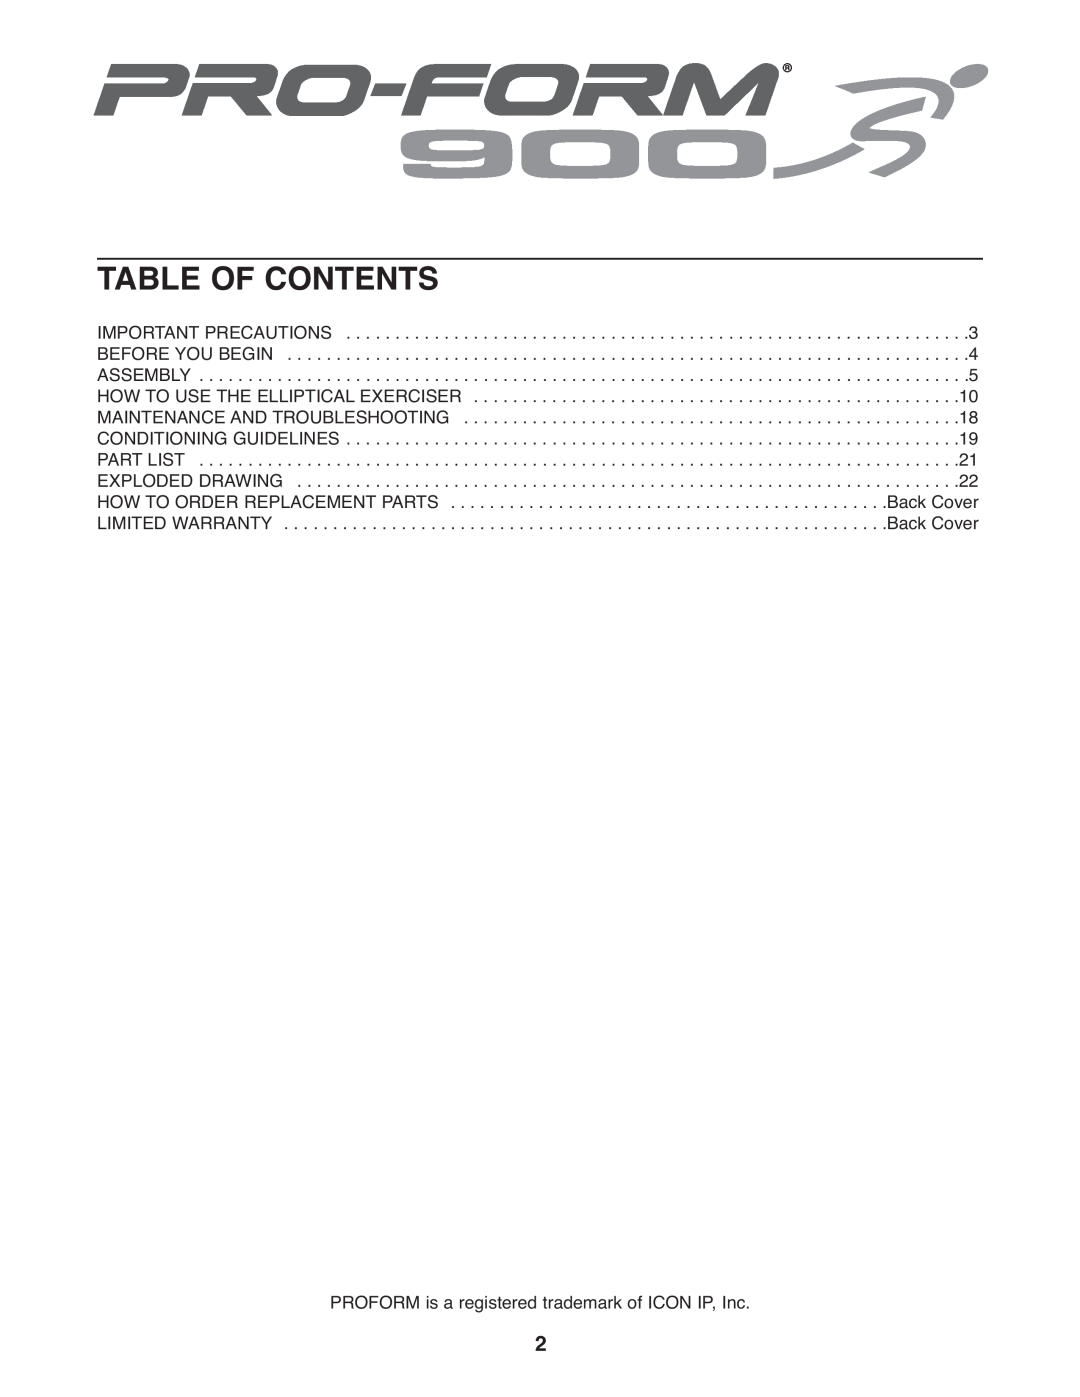 ProForm PFEL5905.0 user manual Table Of Contents, PROFORM is a registered2trademark of ICON IP, Inc 